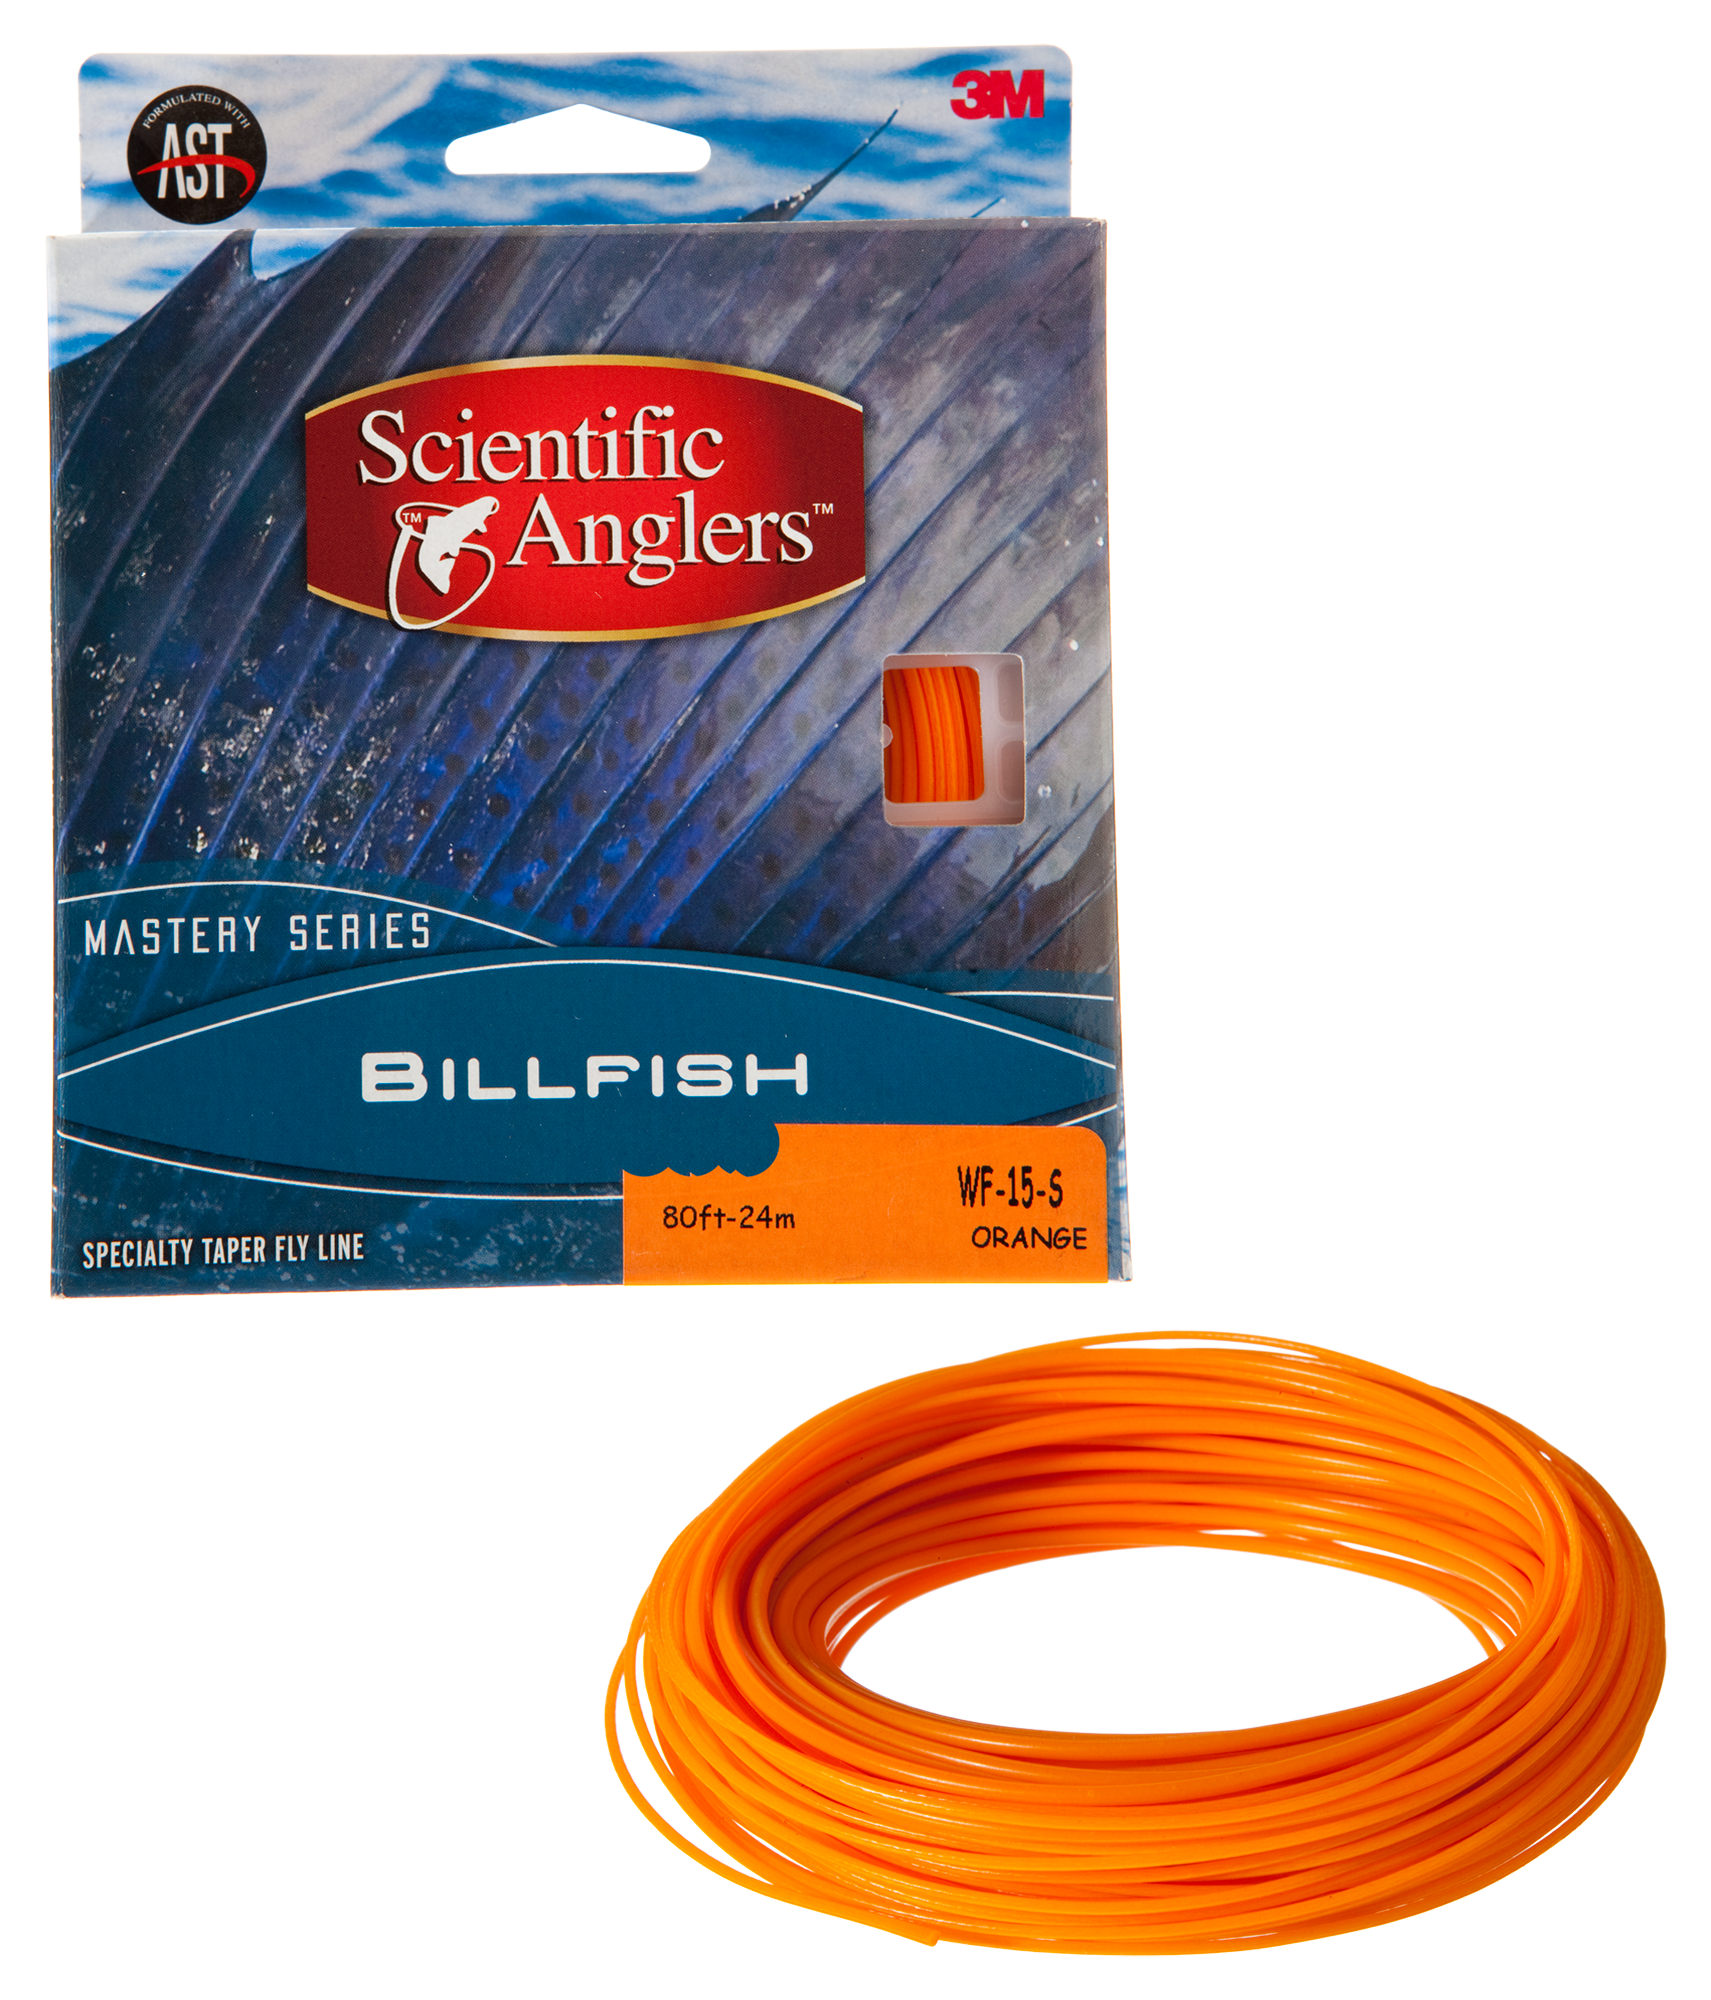 Scientific Anglers Mastery Series Billfish Taper Fly Line